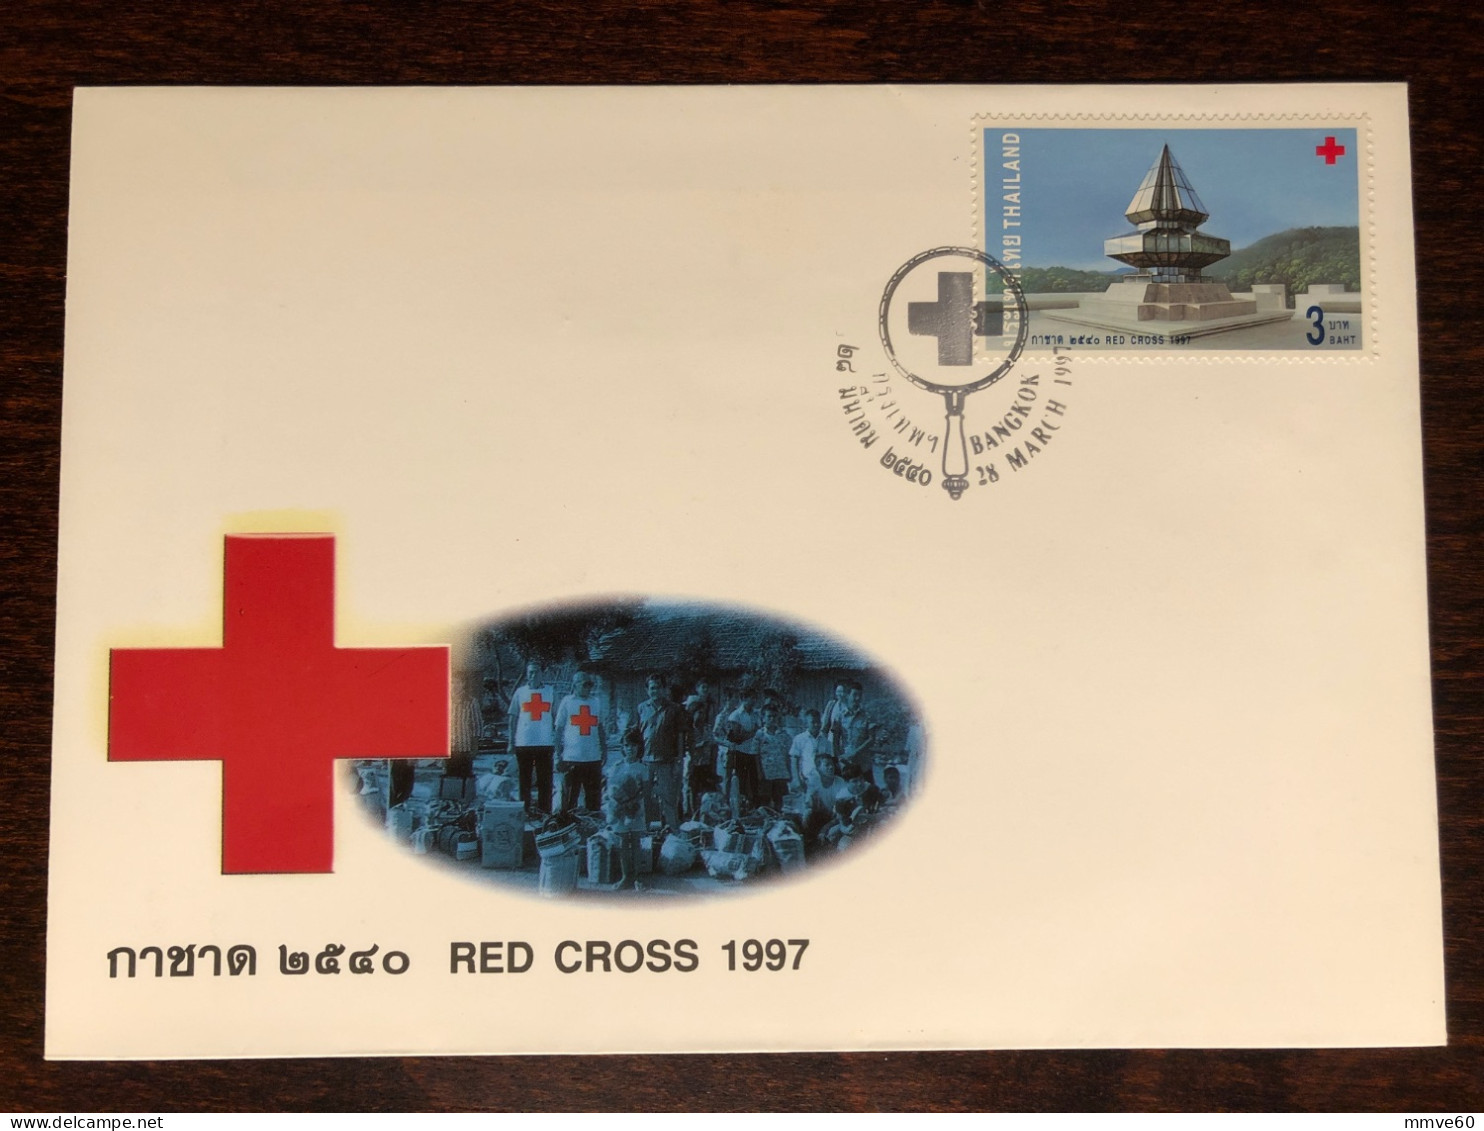 THAILAND FDC COVER 1997 YEAR RED CROSS HEALTH MEDICINE STAMPS - Thaïlande